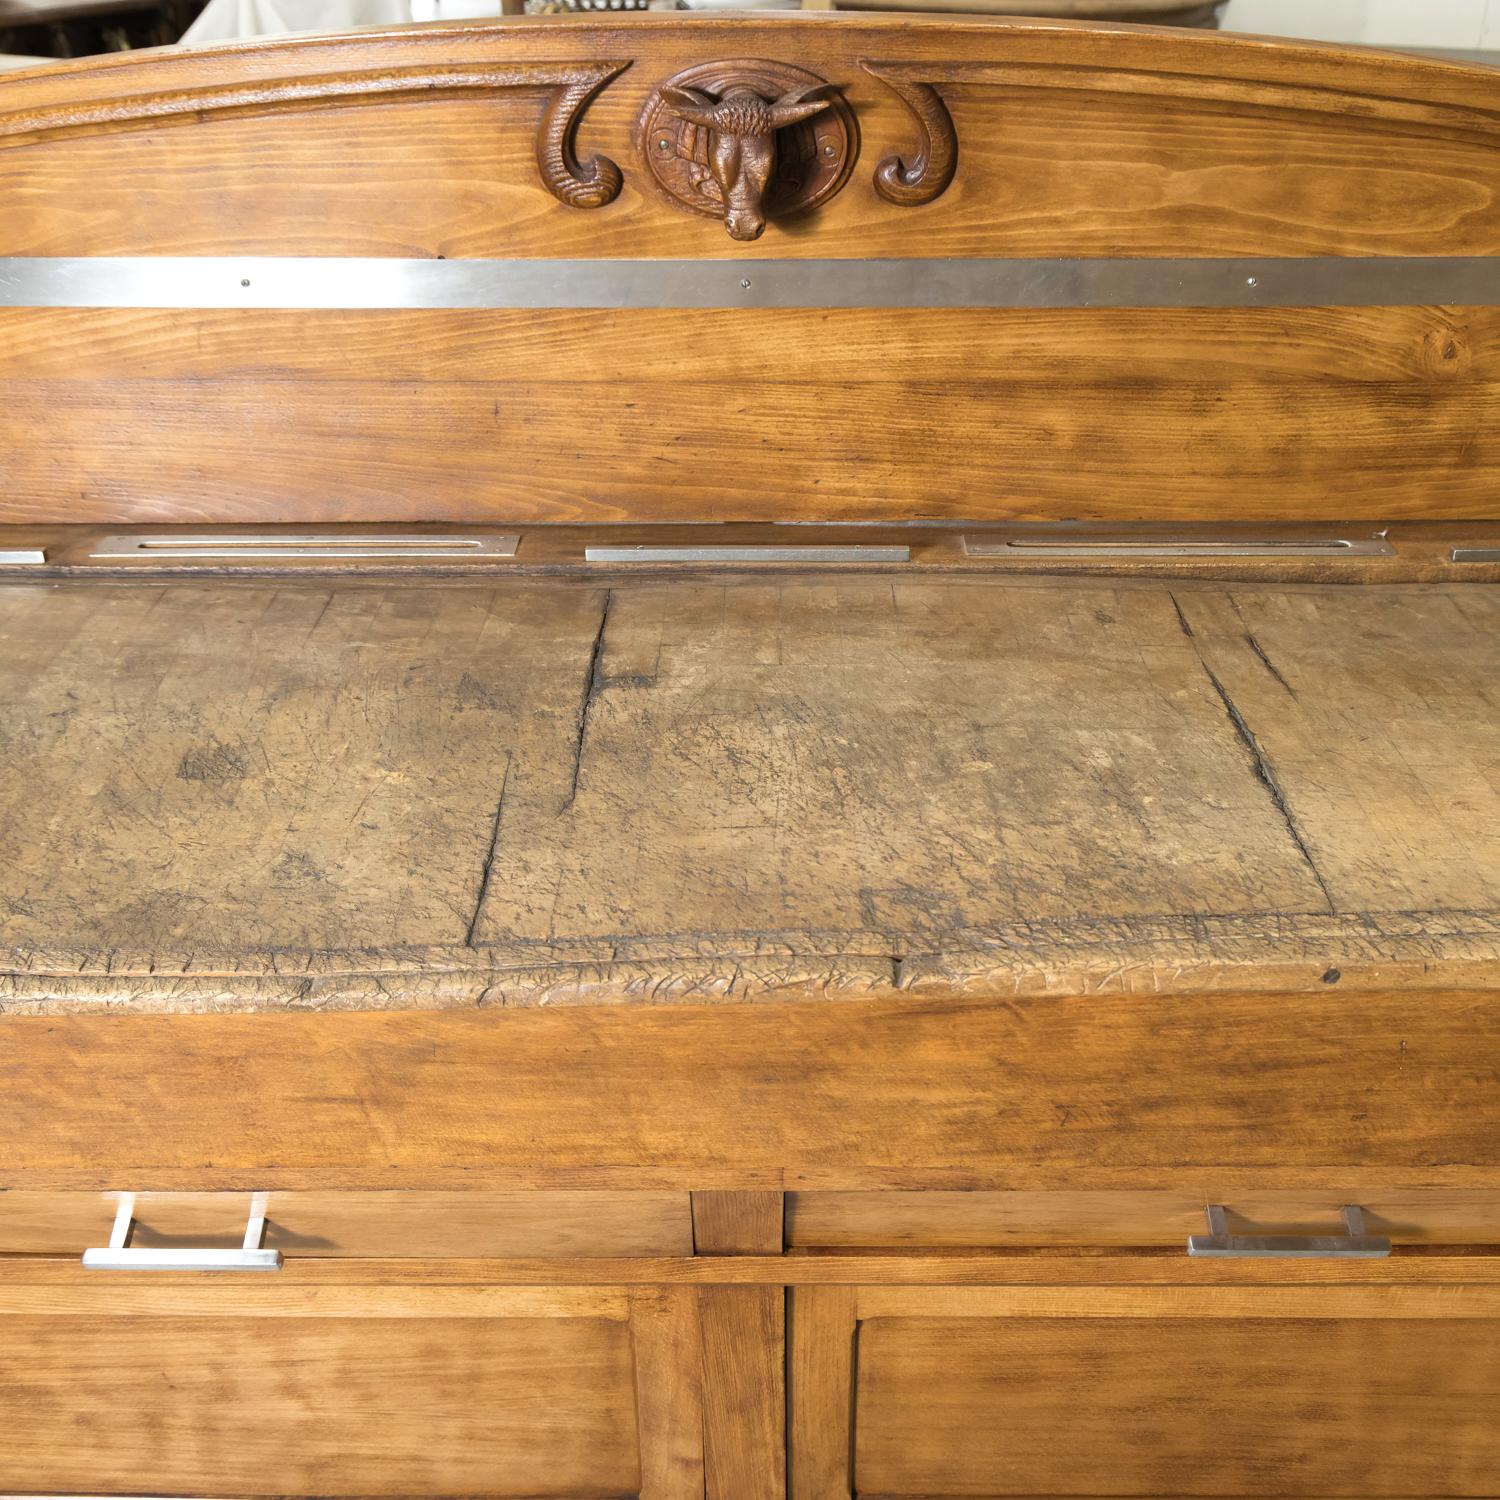 Large Early 20th Century French Double Billot de Boucher or Butcher Block In Good Condition For Sale In Birmingham, AL